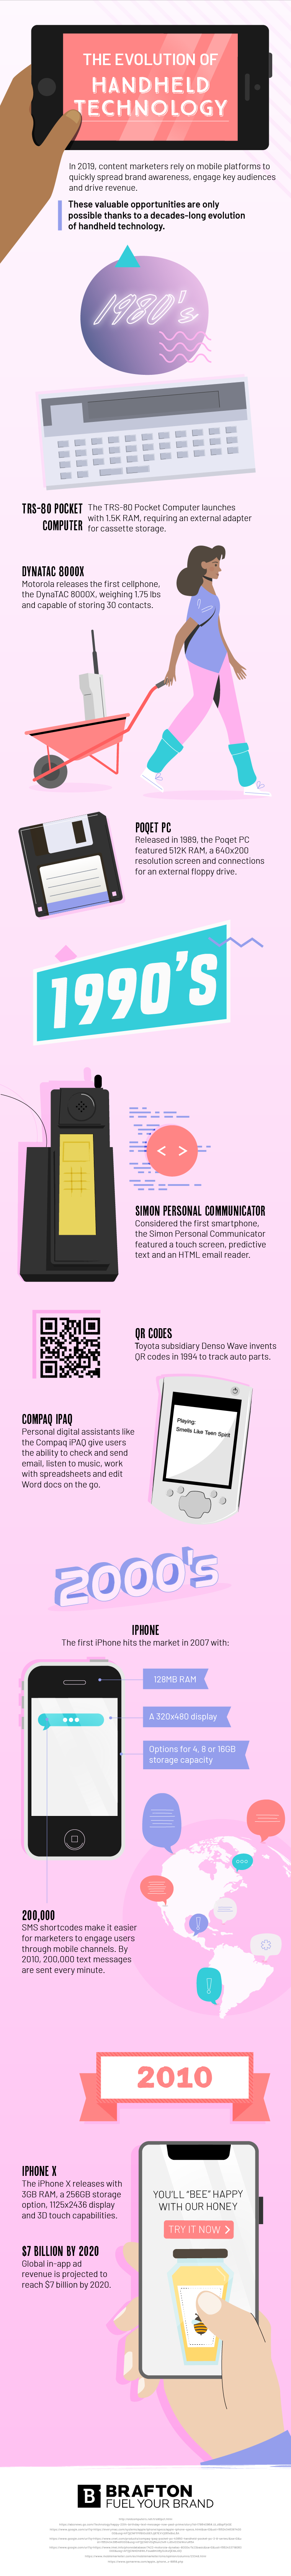 The evolution of handheld technology infographic